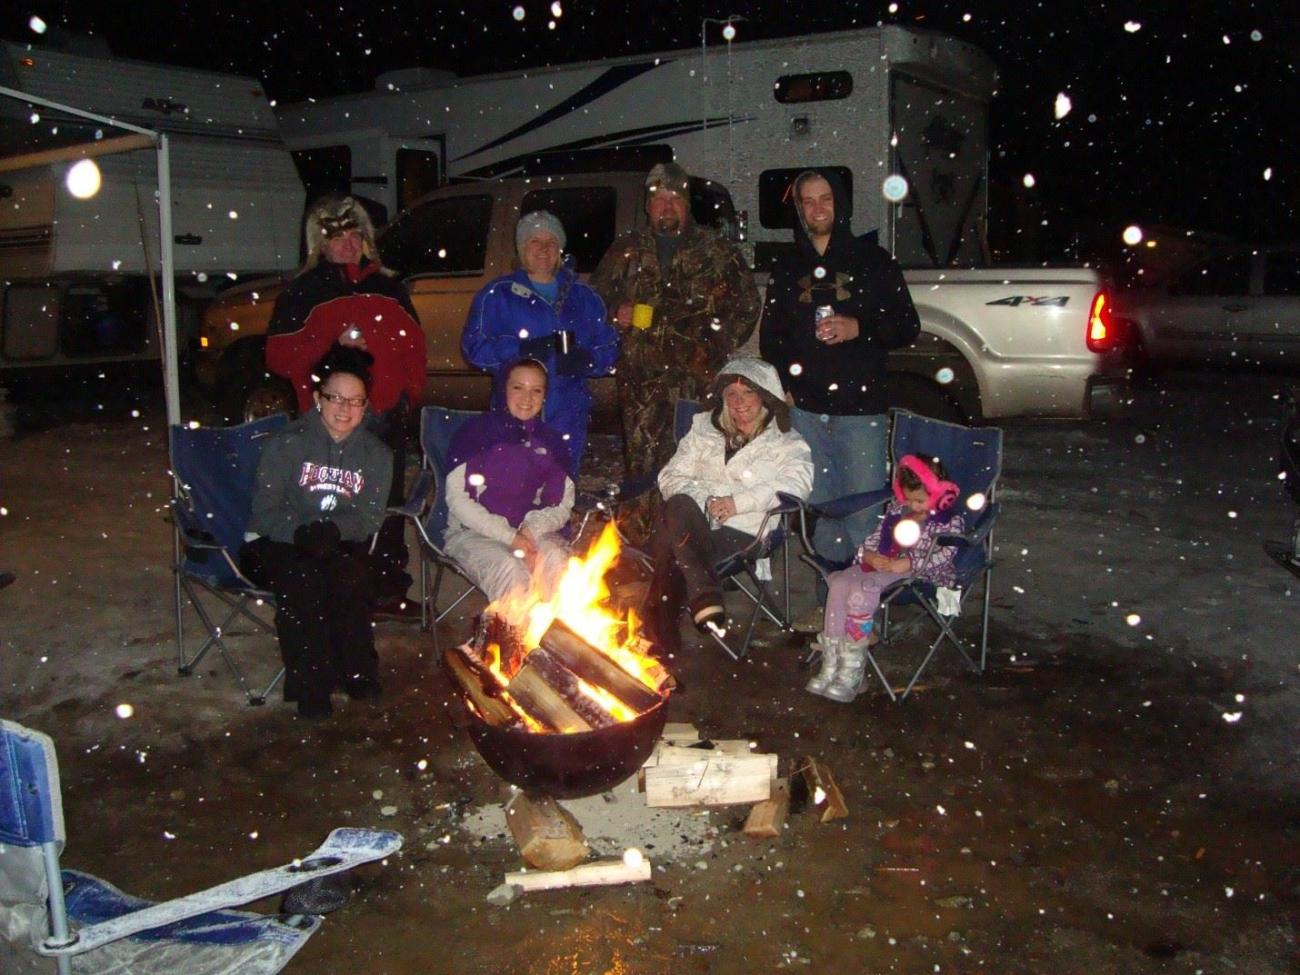 A group of people sit around a campfire while snow falls.